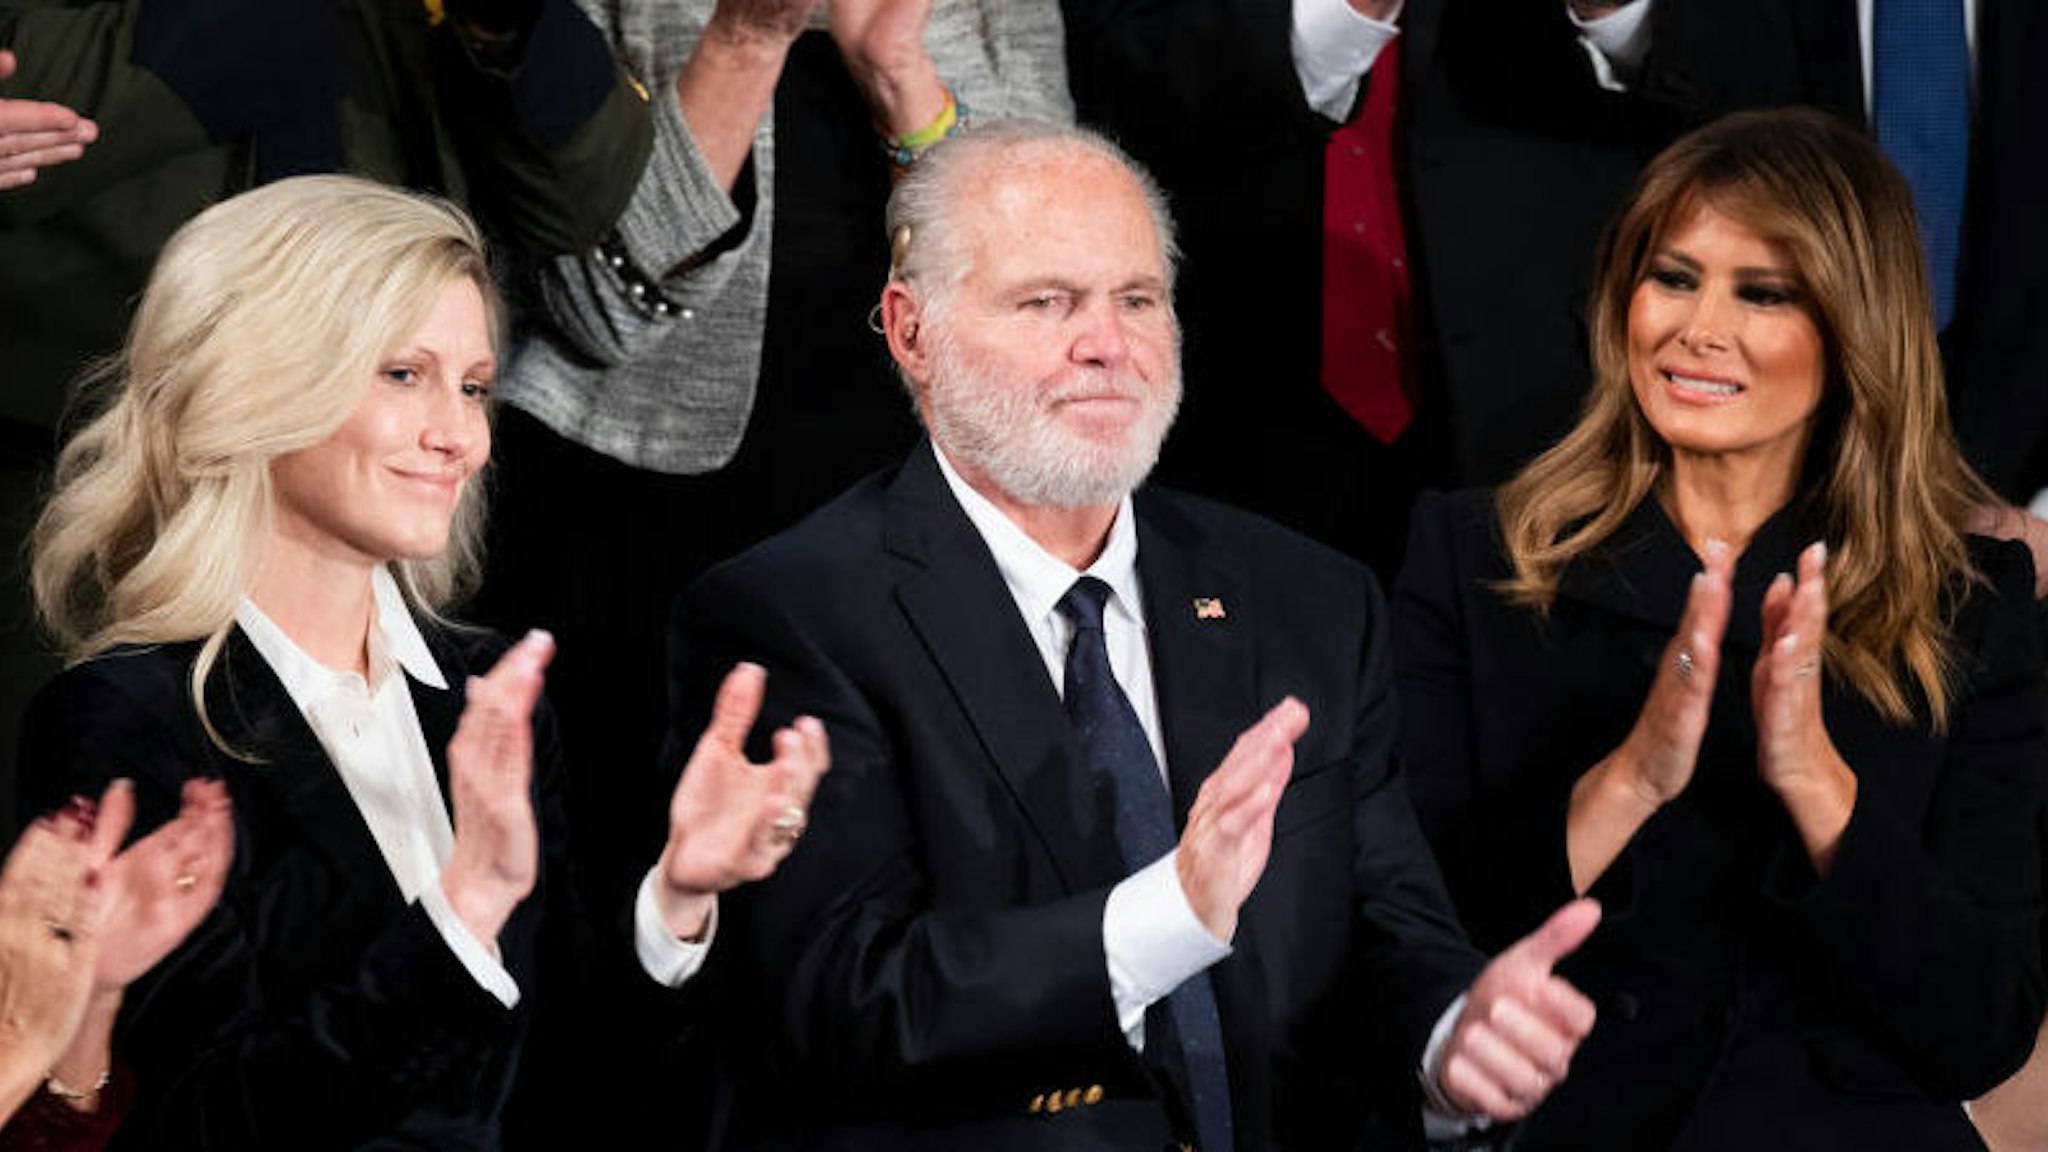 Rush Limbaugh is recognized before First Lady Melania Trump, right, awarded him the Presidential Medal of Freedom during President Donald Trump’s State of the Union address in the House Chamber on Tuesday, February 4, 2020. (Photo By Tom Williams/CQ Roll Call)